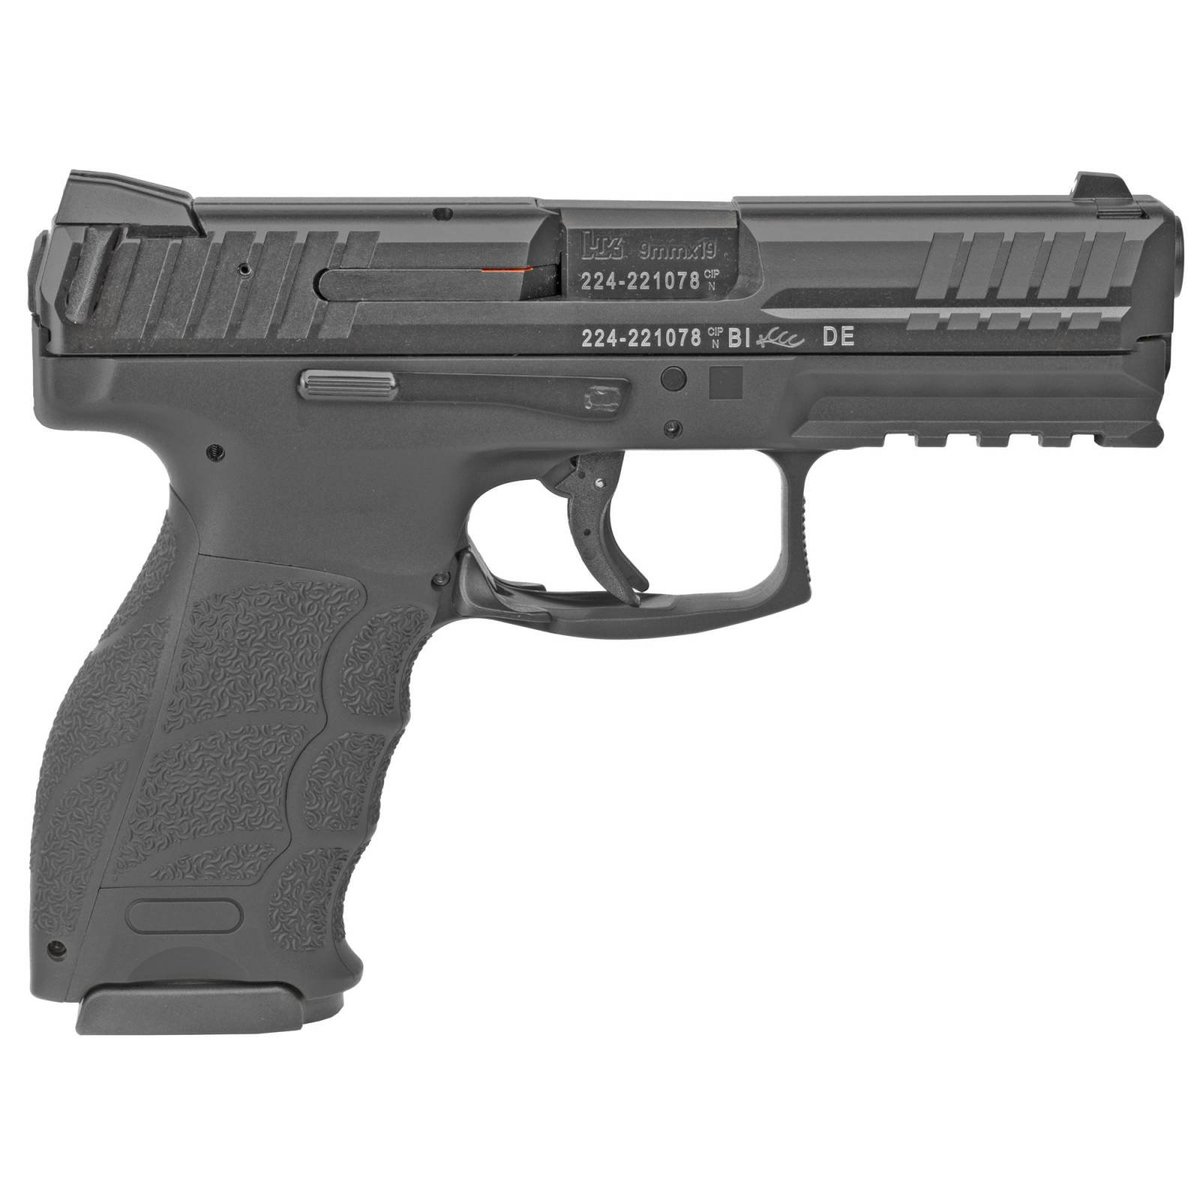 iraqveteran8888-on-twitter-h-k-vp9s-for-399-99-after-mail-in-rebate